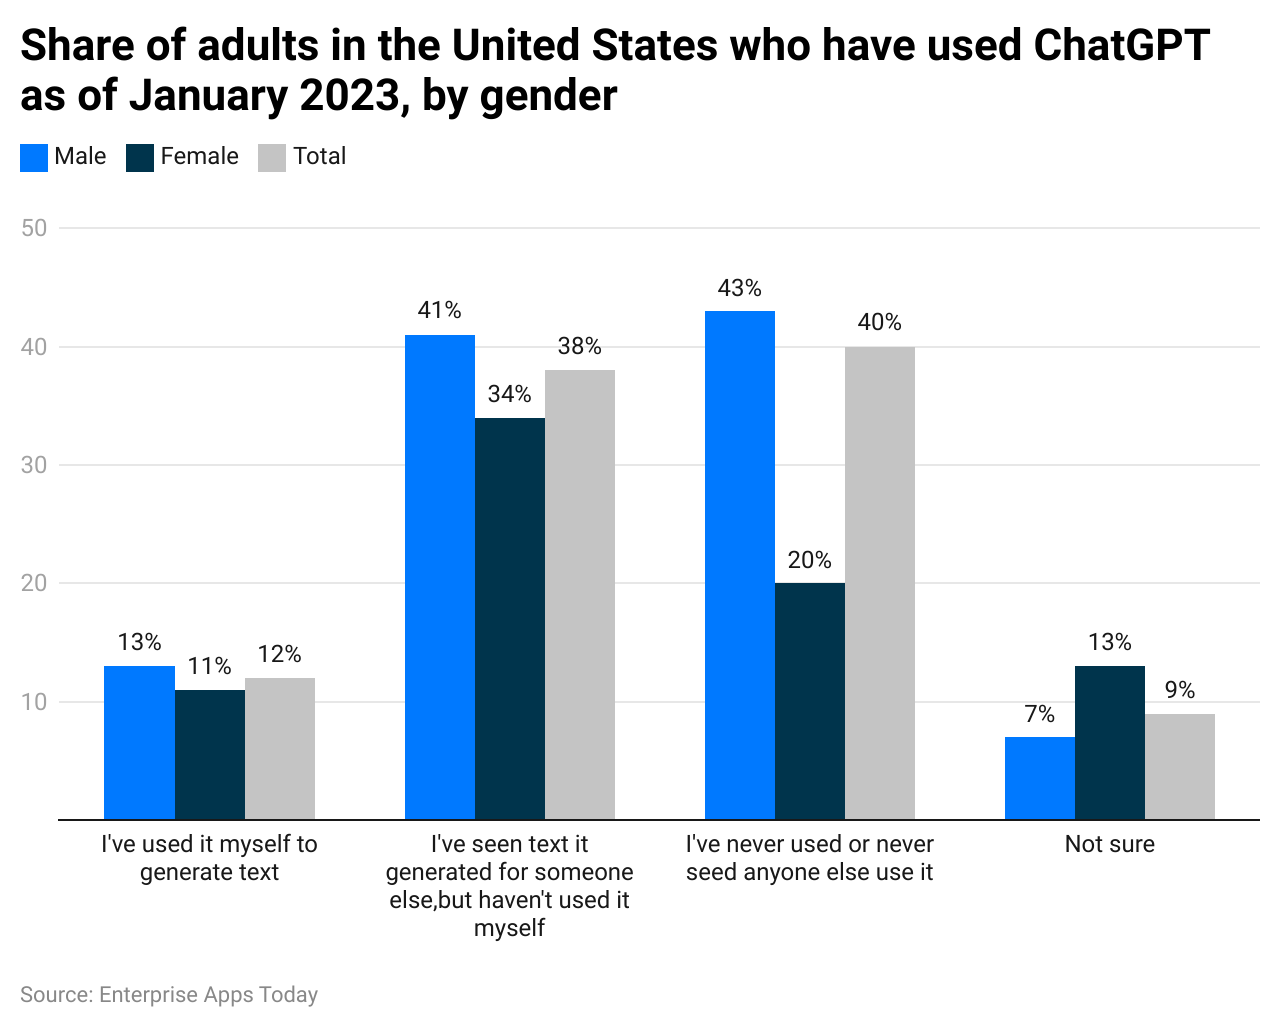 share-of-adults-in-the-united-states-who-have-used-chatgpt-as-of-january-2023-by-gender